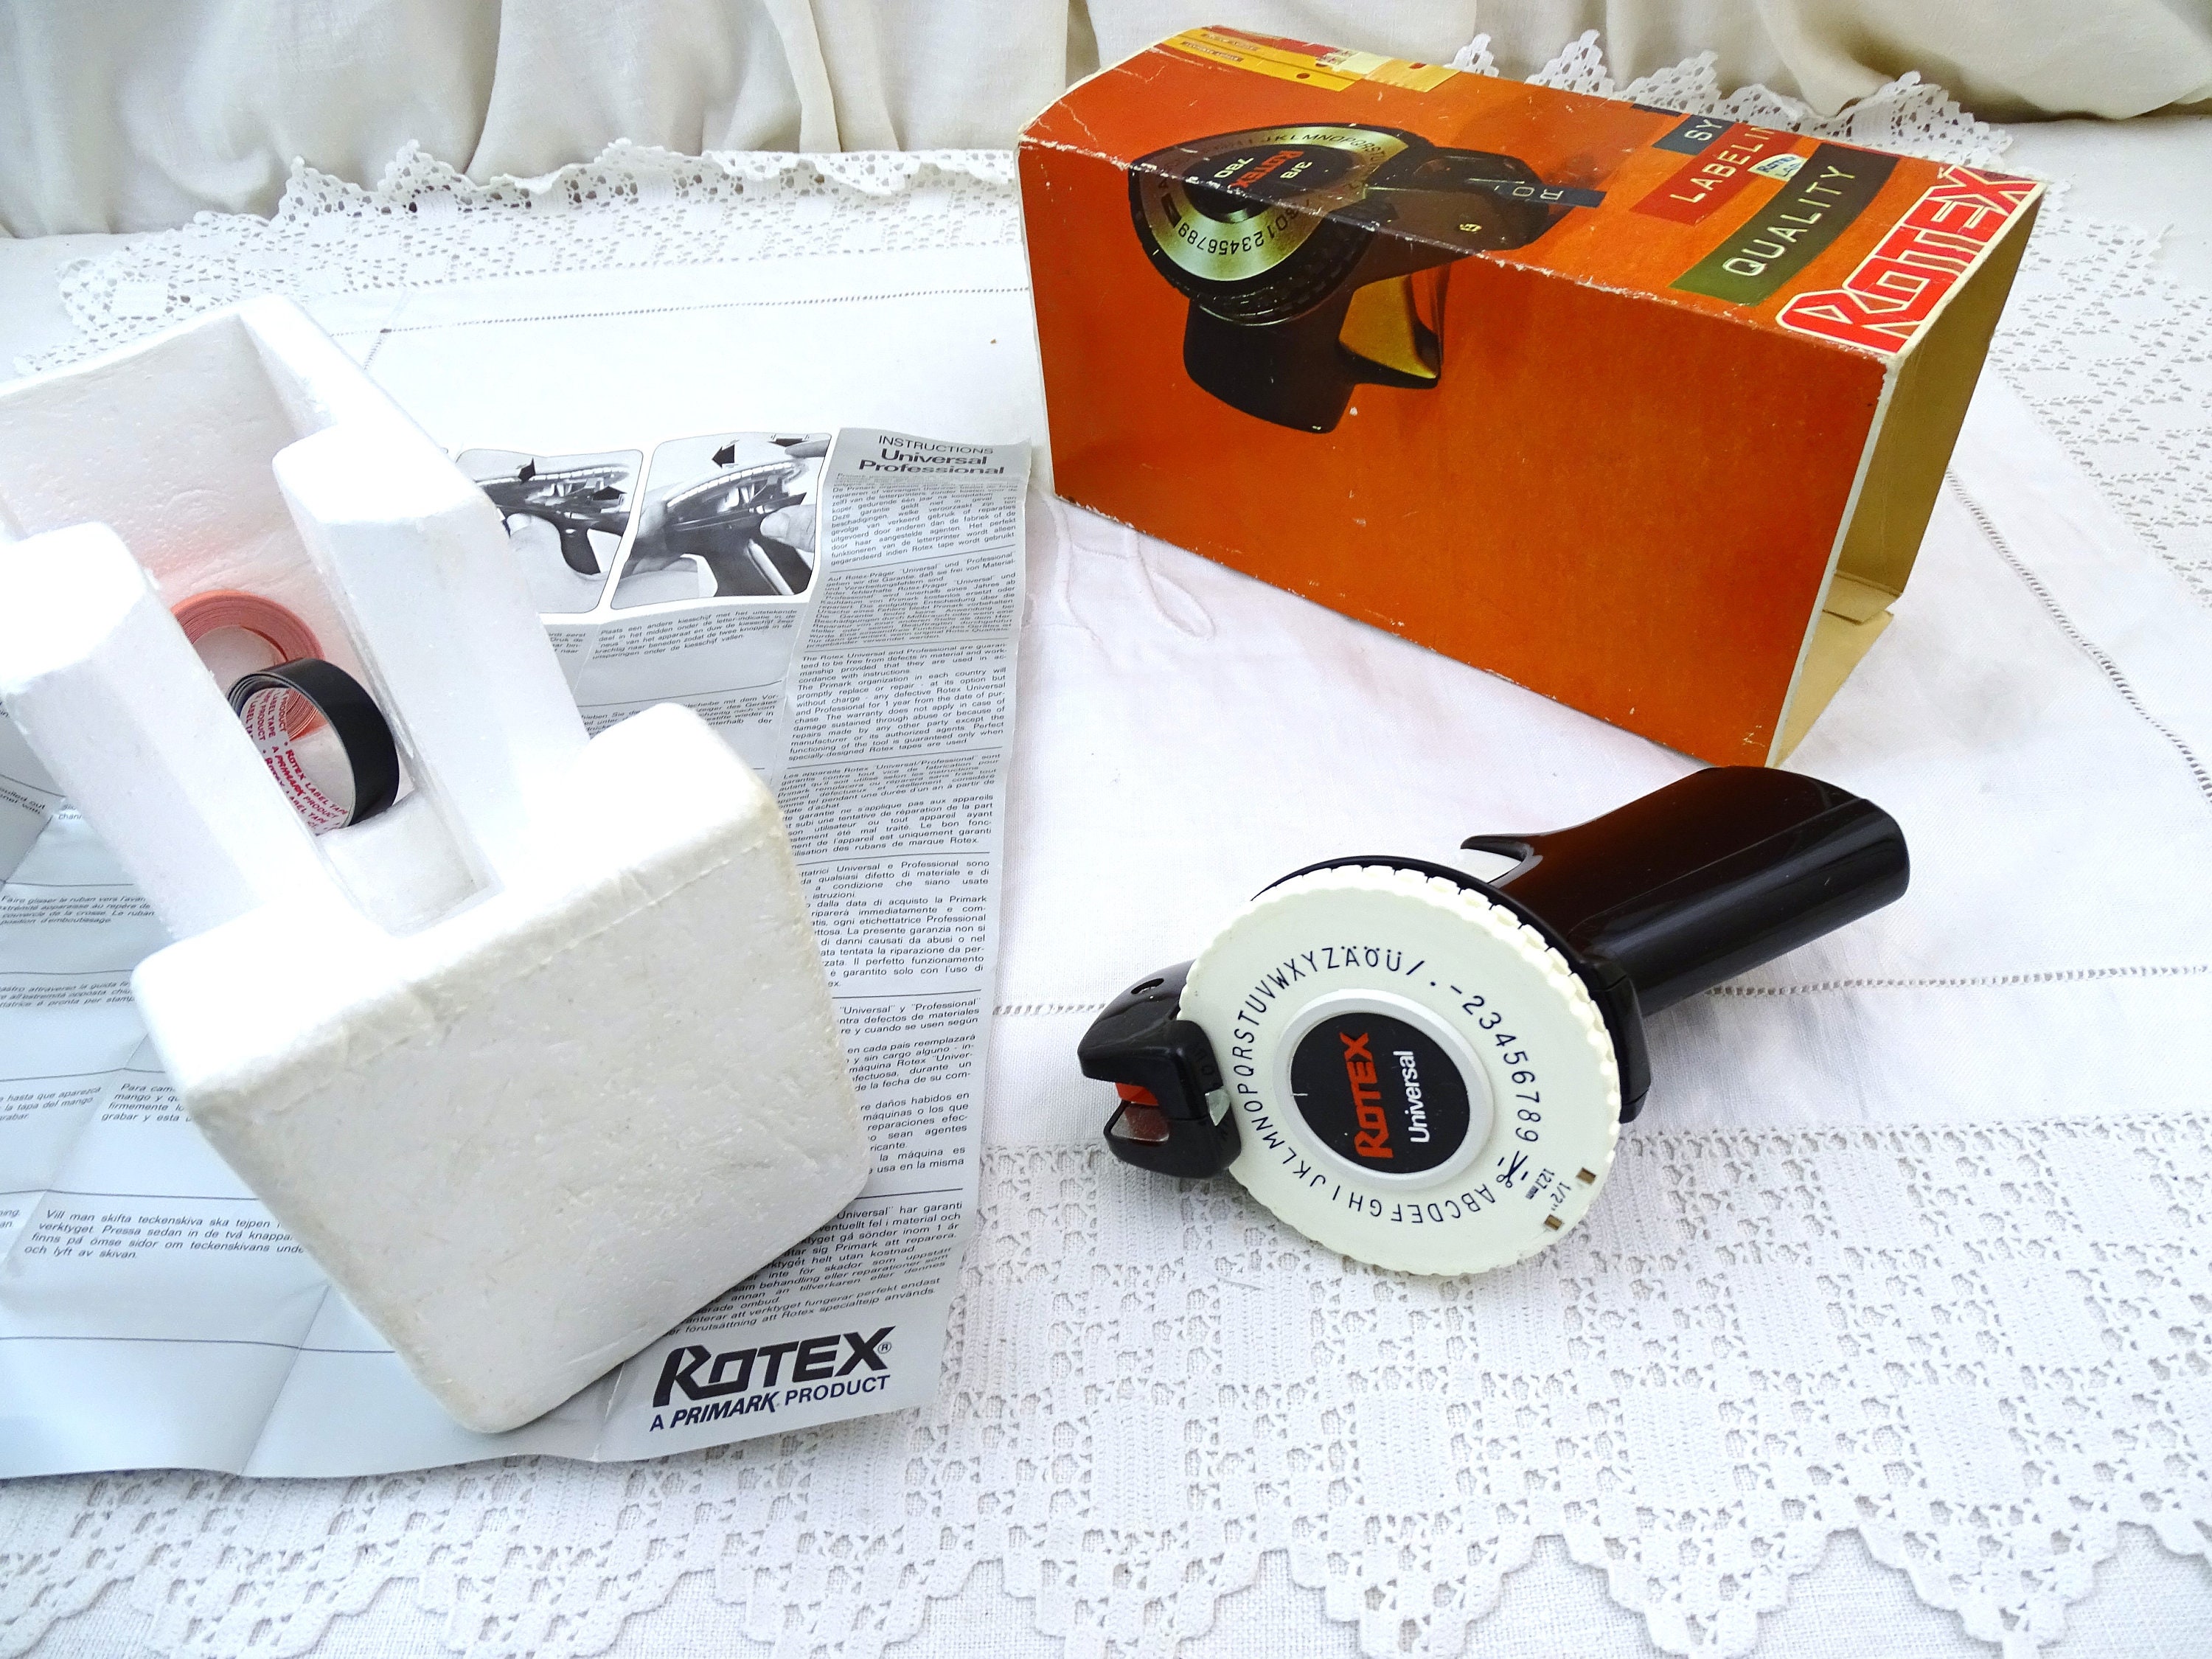 Vintage Rotex Compact Labeler with original box